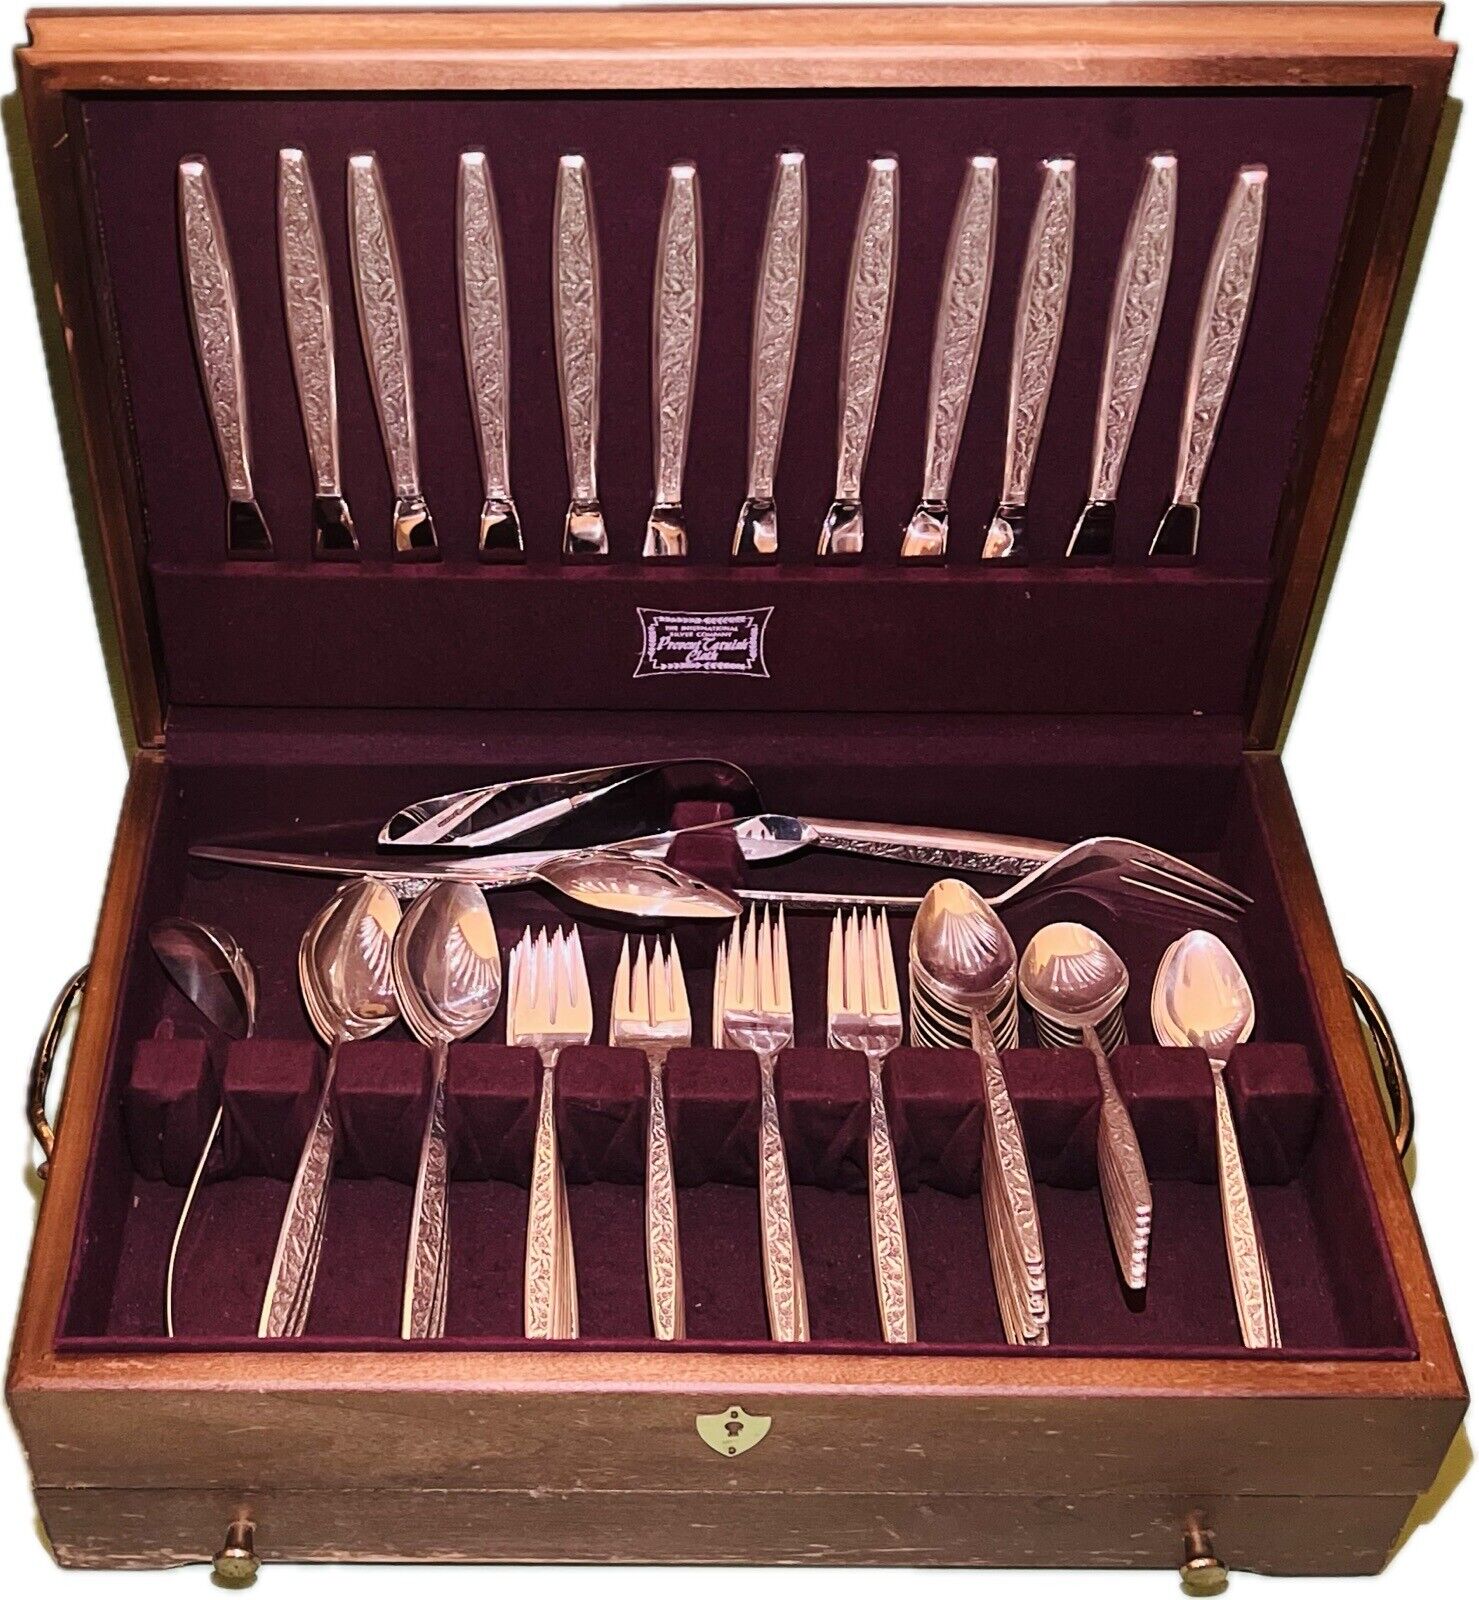 Valencia by International Sterling Silver Flatware 72 pieces with Box, Set of 12